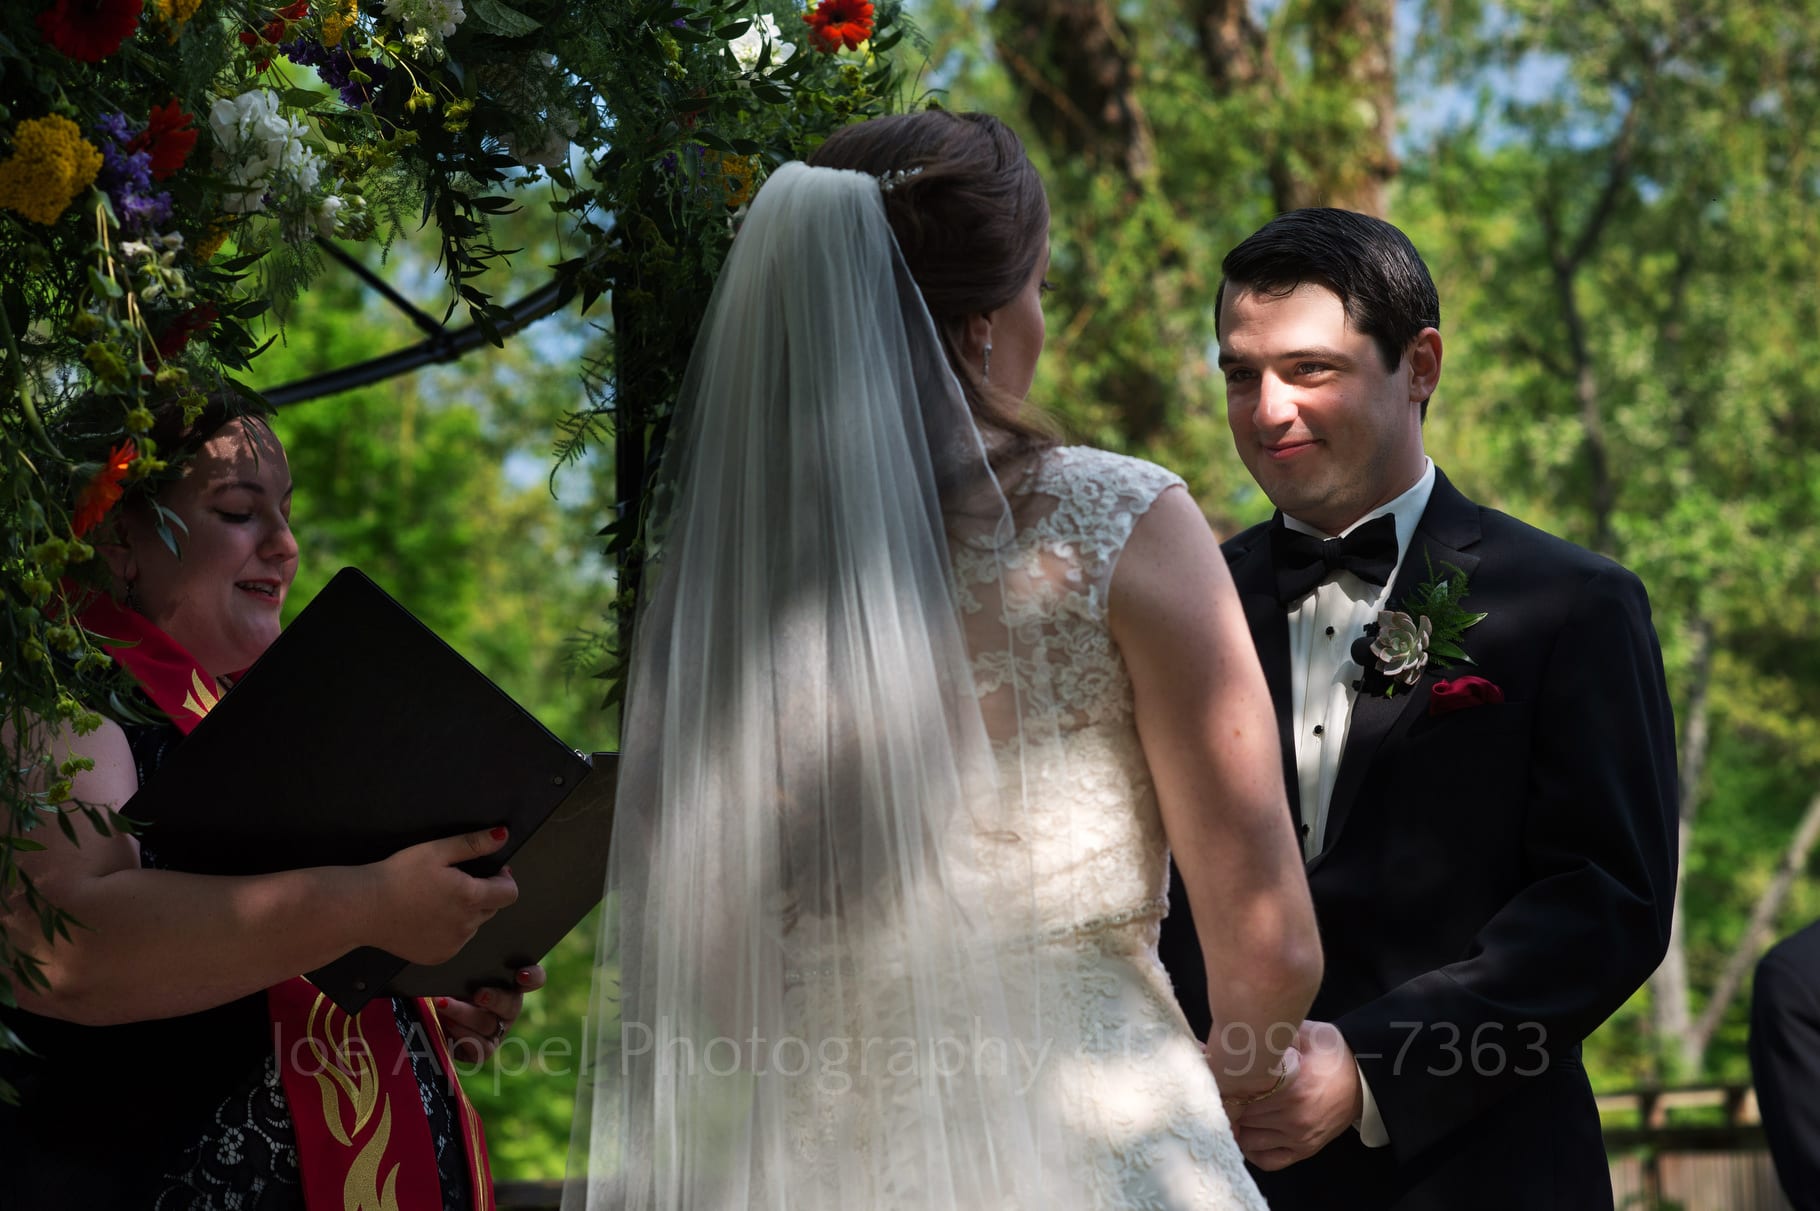 dappled sun illuminates just the face of a groom as he says his vows while facing his bride during their Chanteclaire Farm Wedding.